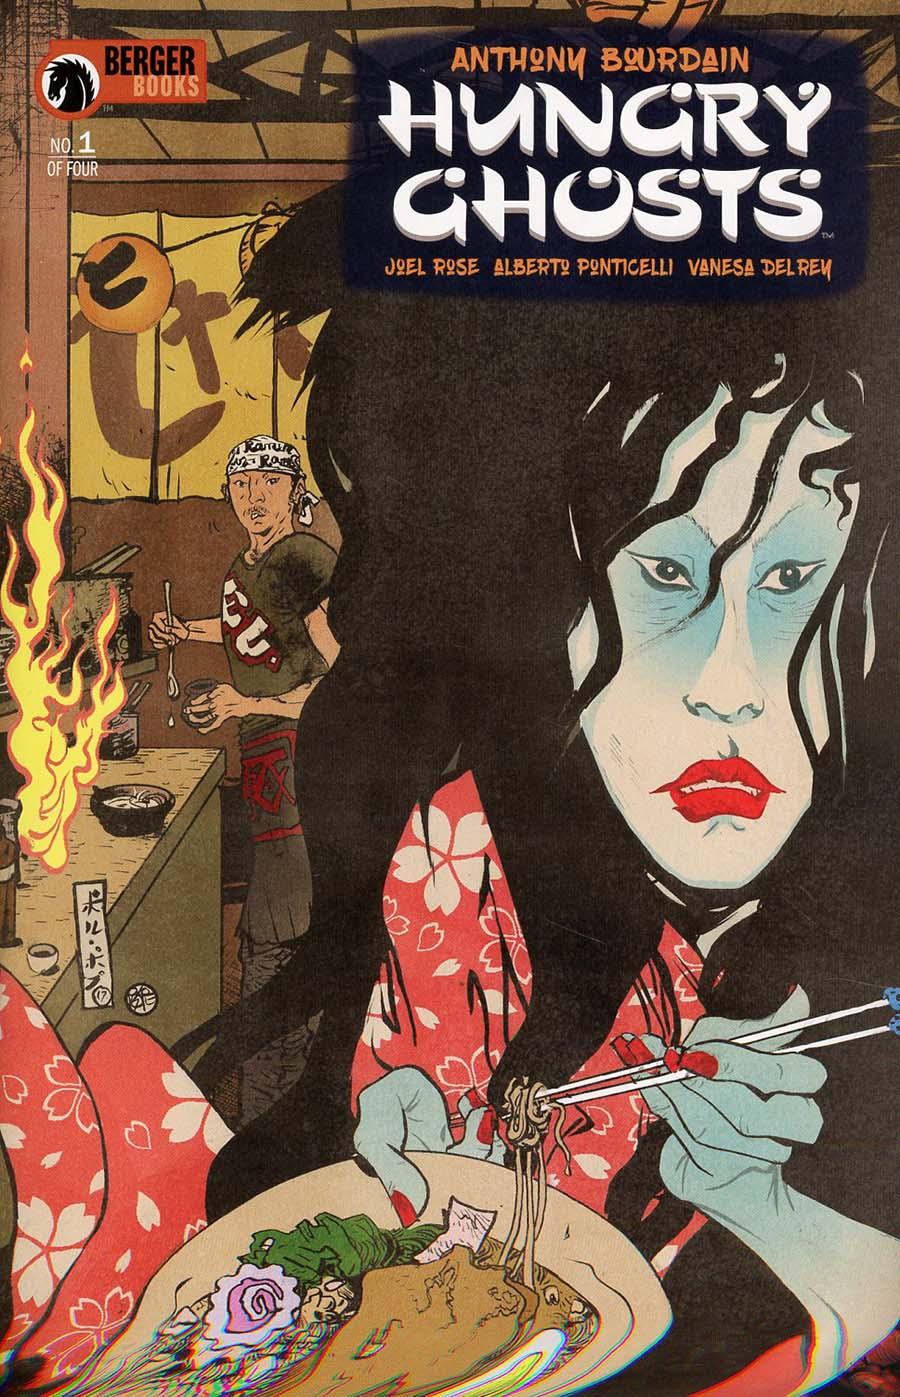 Hungry Ghosts Vol. 1 #1